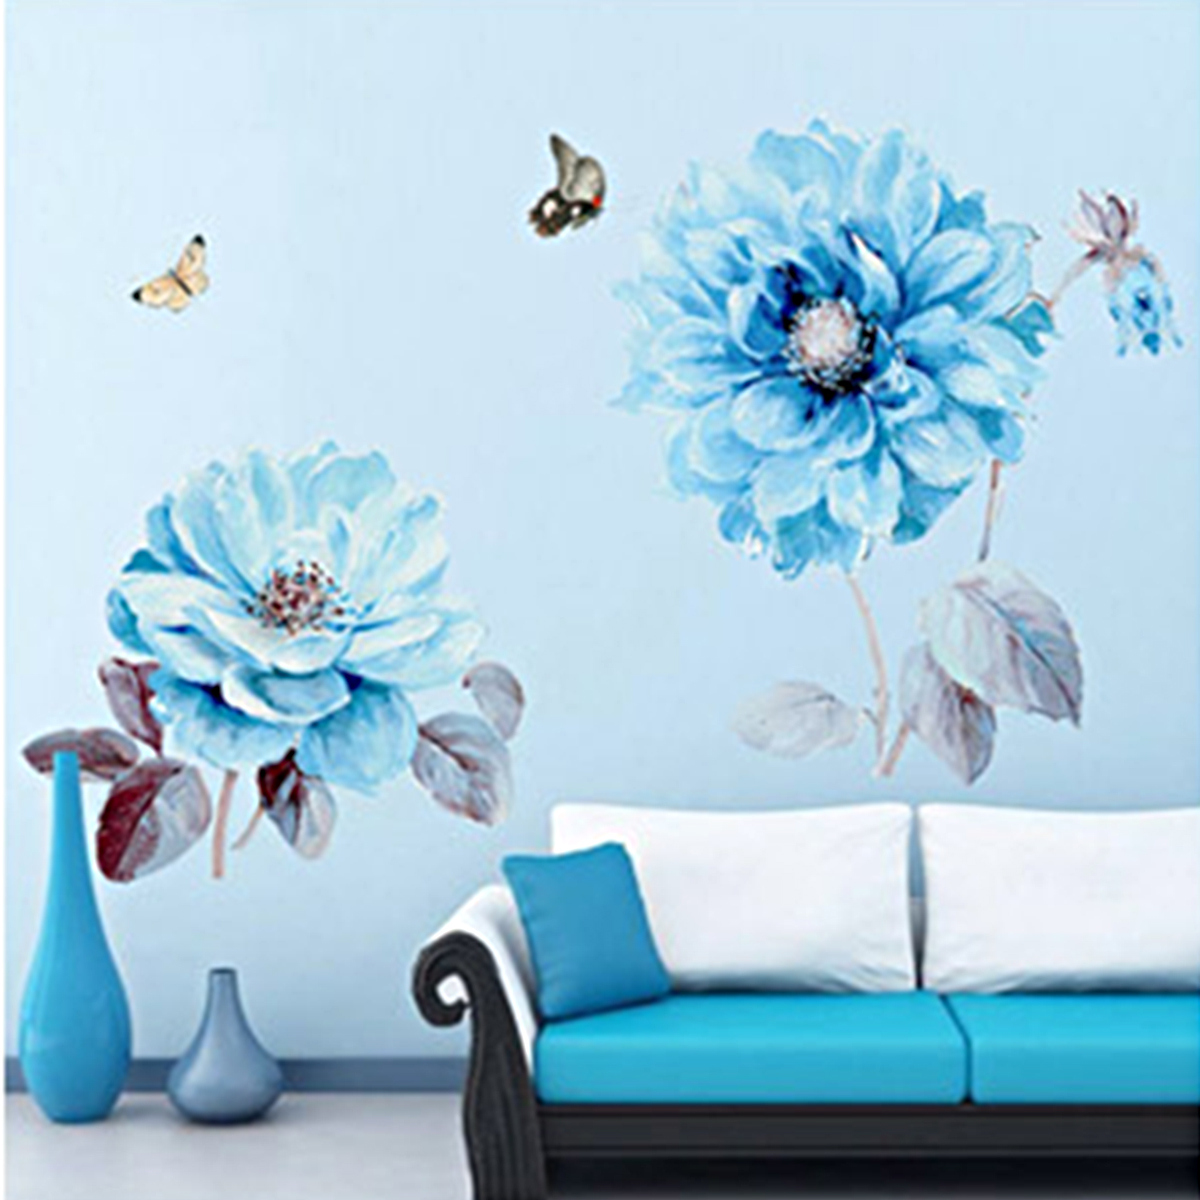 Blue-Flowers-Wall-Sticker-Room-Sticker-Living-Room-Background-Bedroom-Decorations-1524262-4